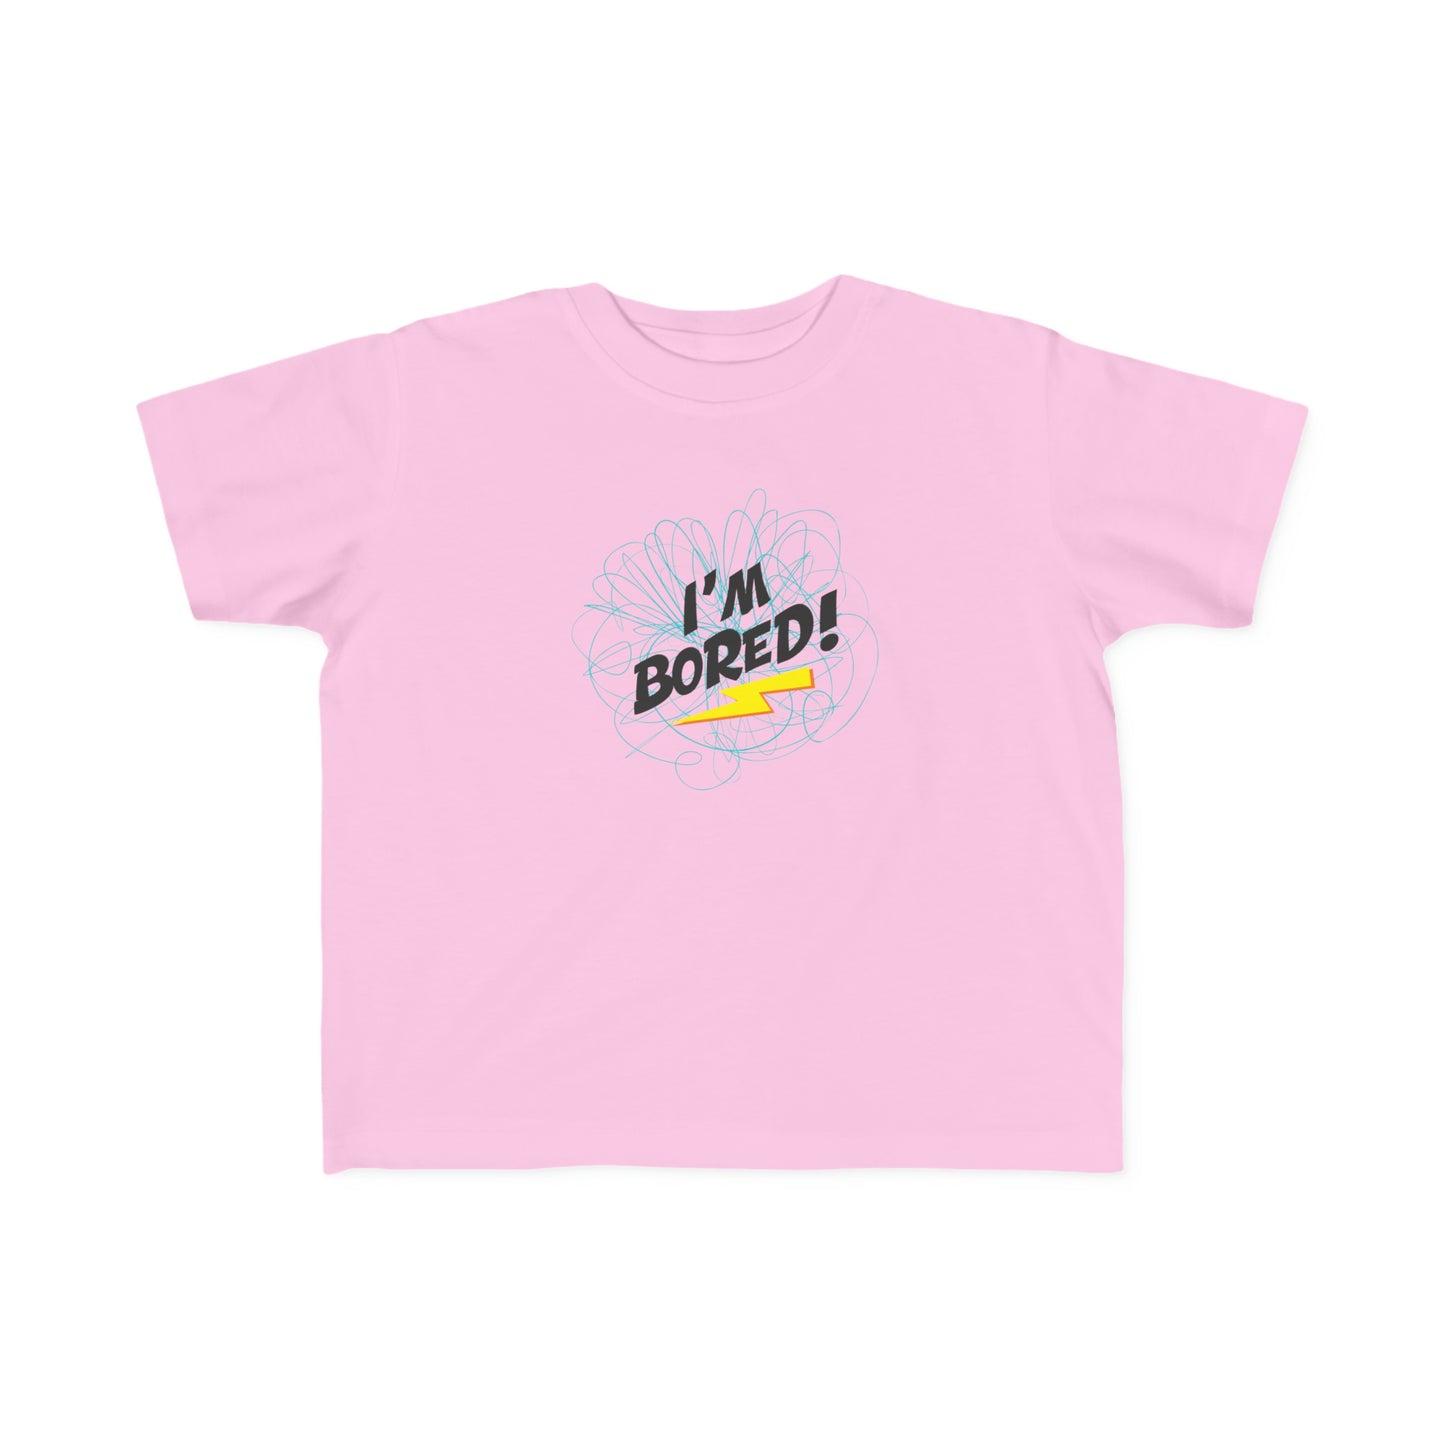 I'm bored Toddler's Fine Jersey Tee